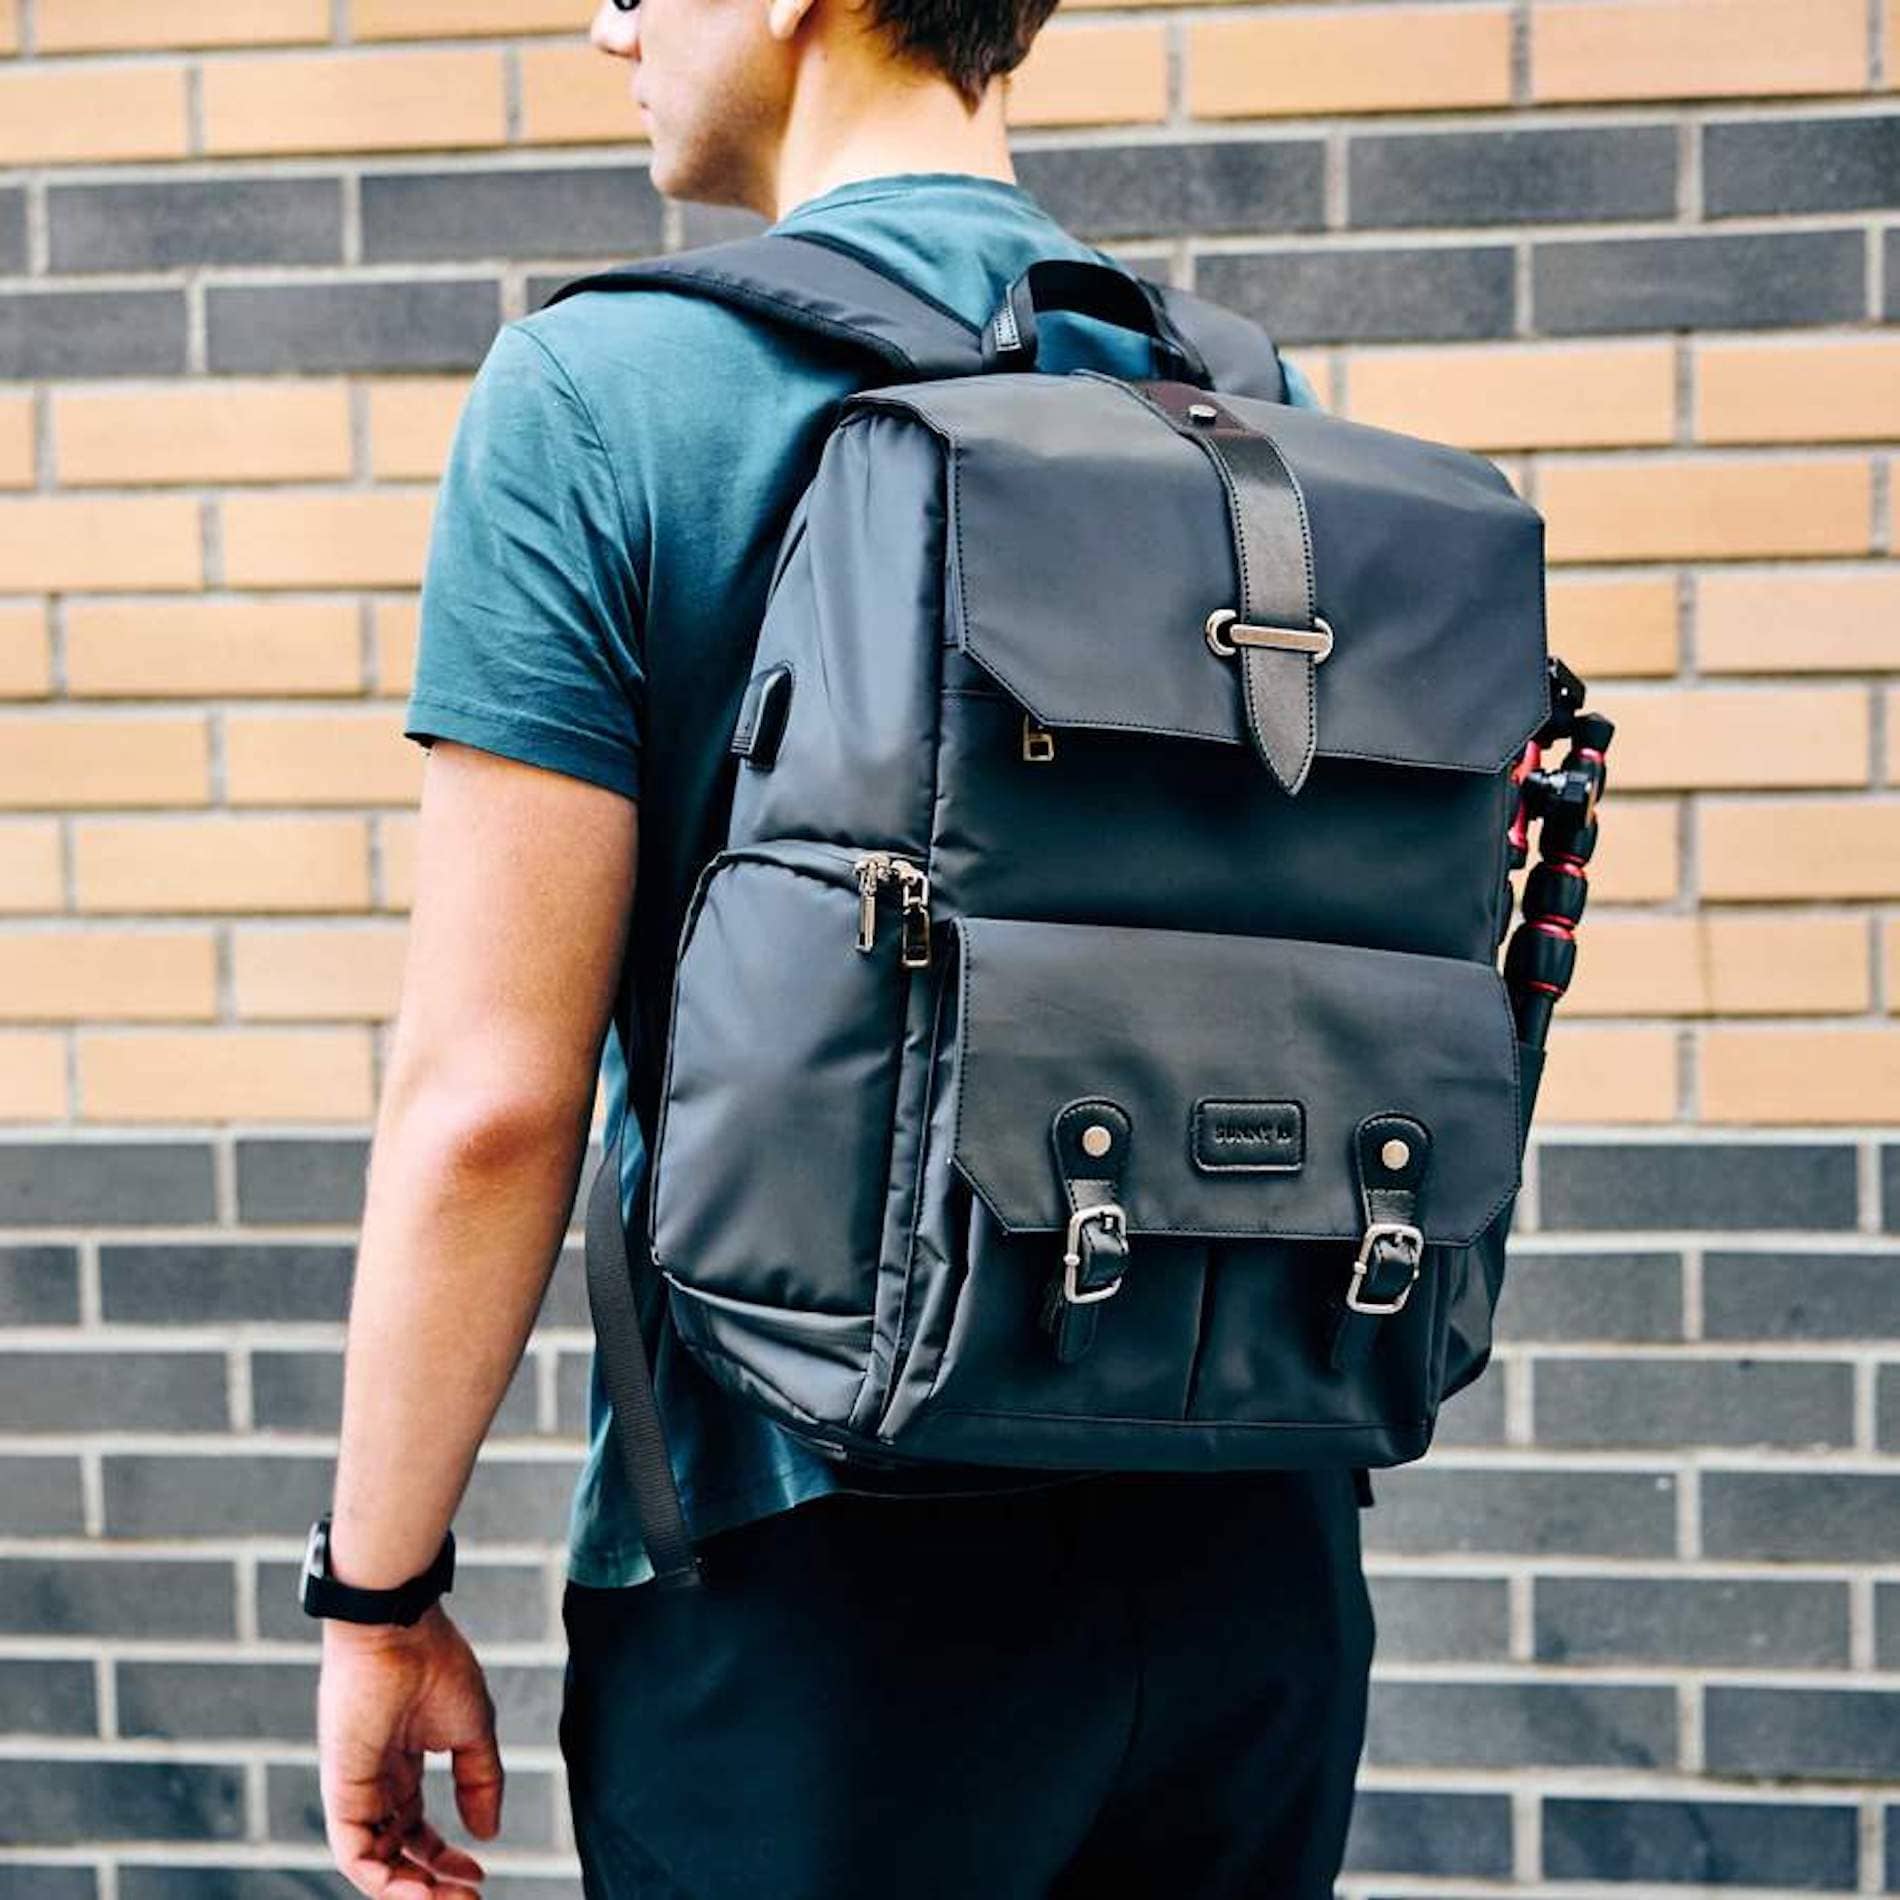 How to Start a Photography Business - The Voyager Camera Backpack